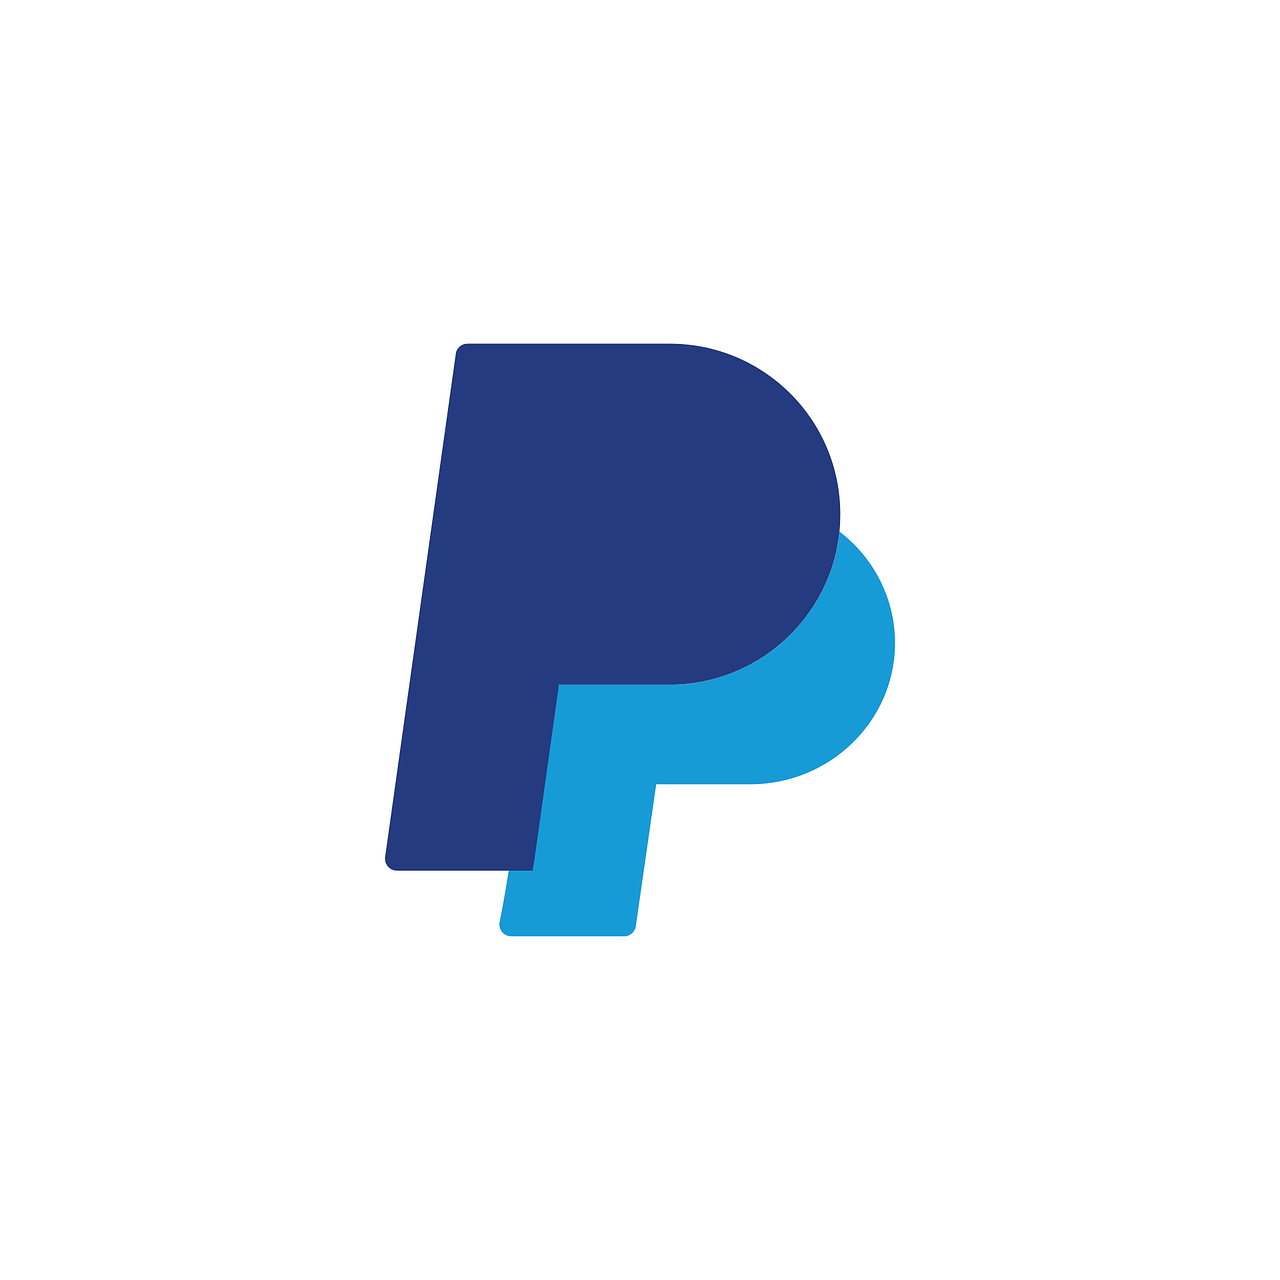 Account holders sue PayPal for allegedly withholding account funds